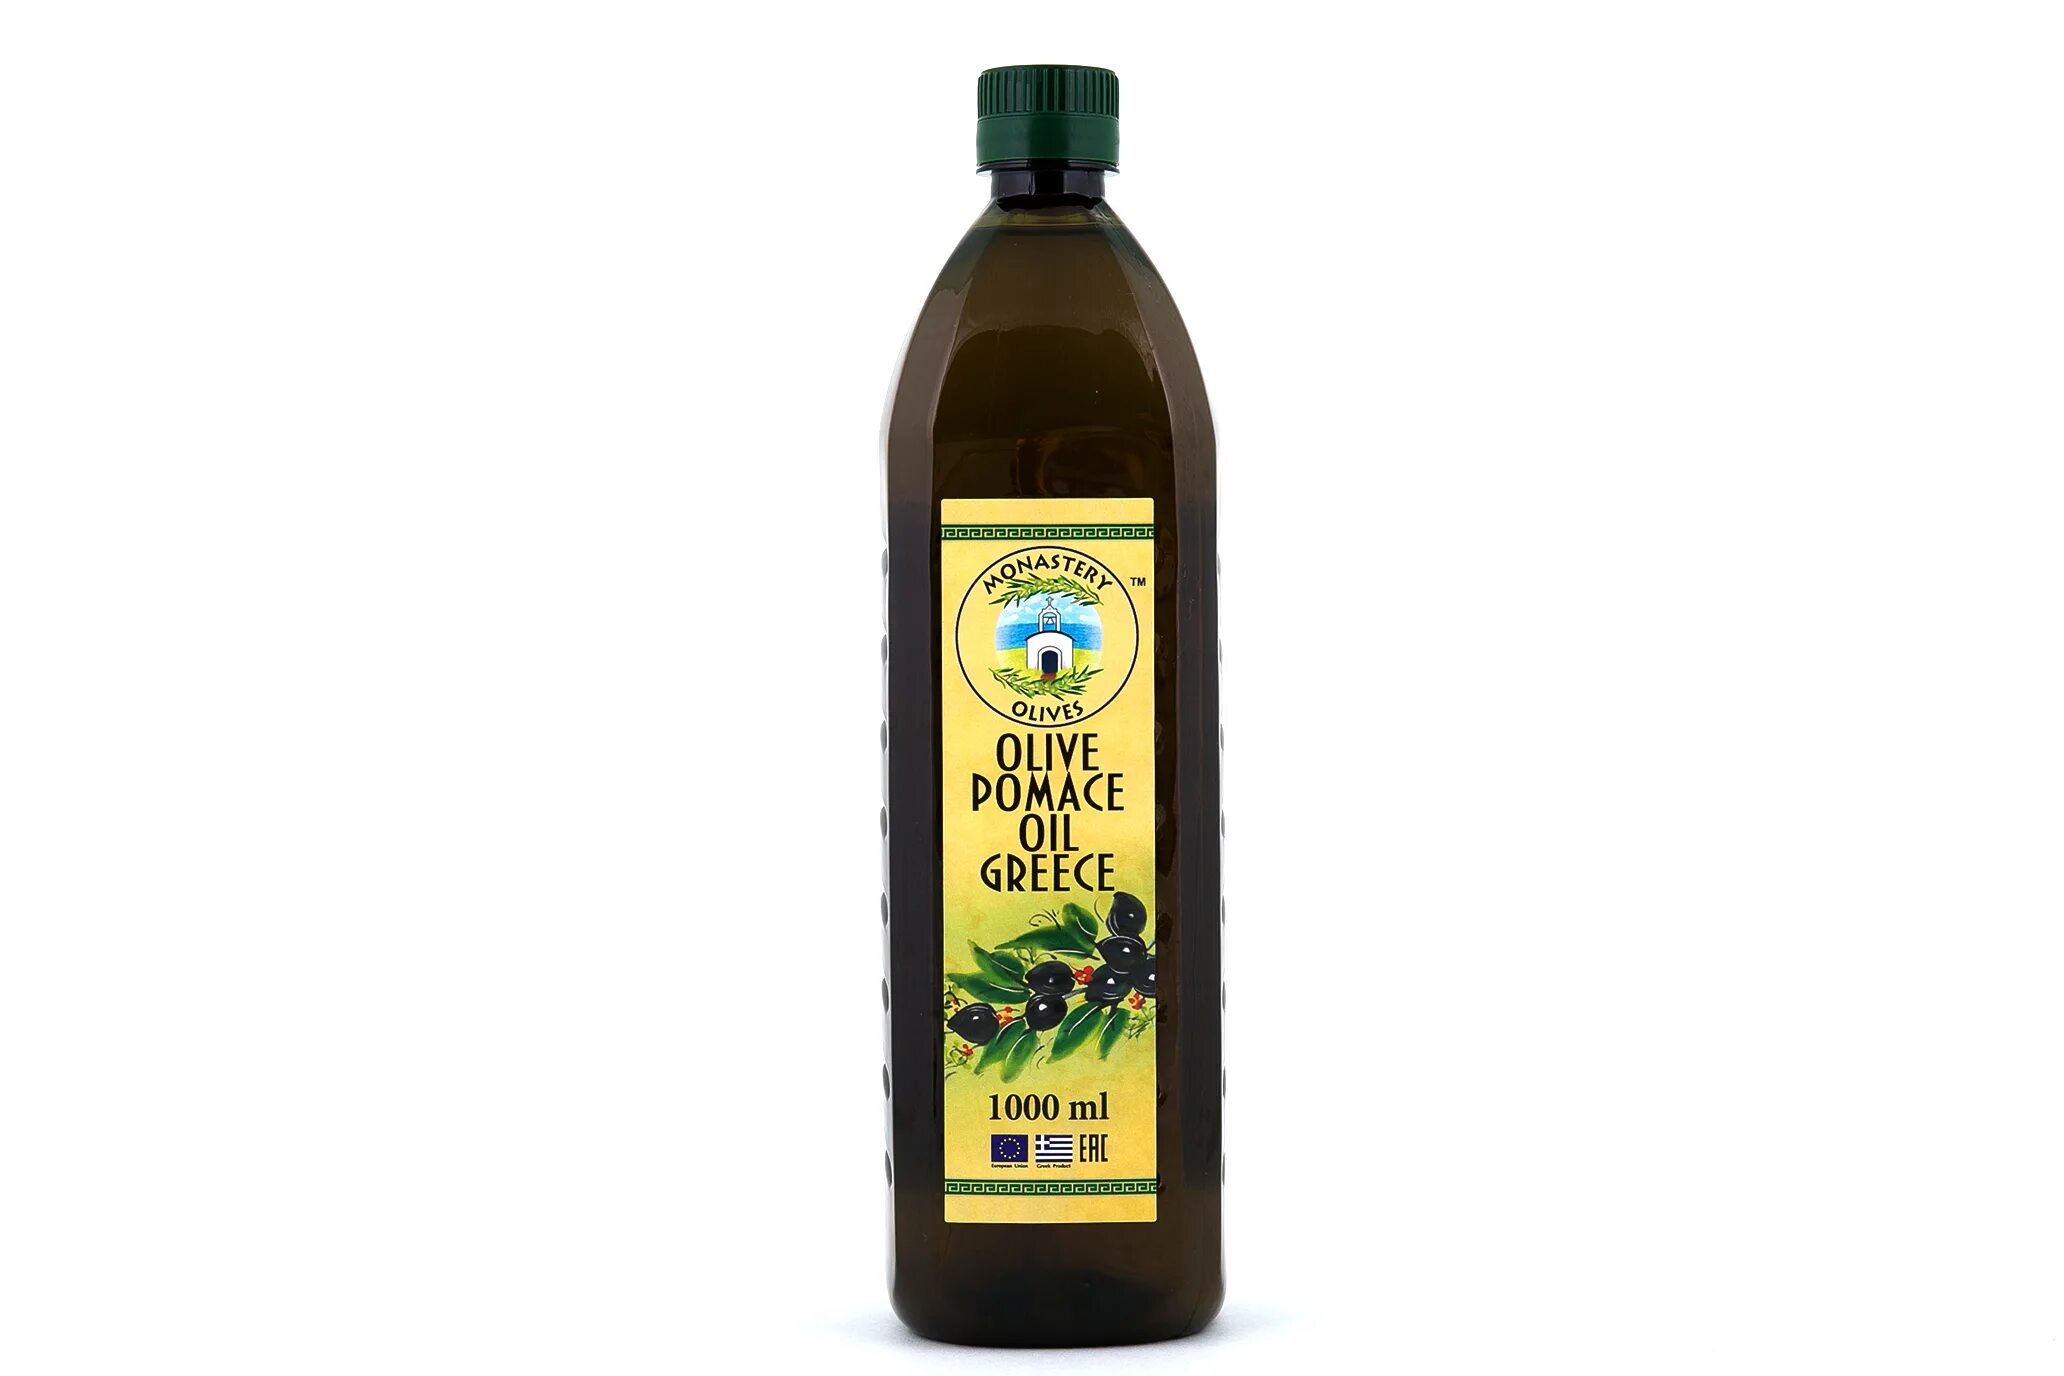 Оливковое масло Pomace Olive Oil, 1 л. Масло оливковое Pomace 1л. Каламата оливковое масло 1л. Оливковое масло "Divo Olive Pomace Oil" 1l.